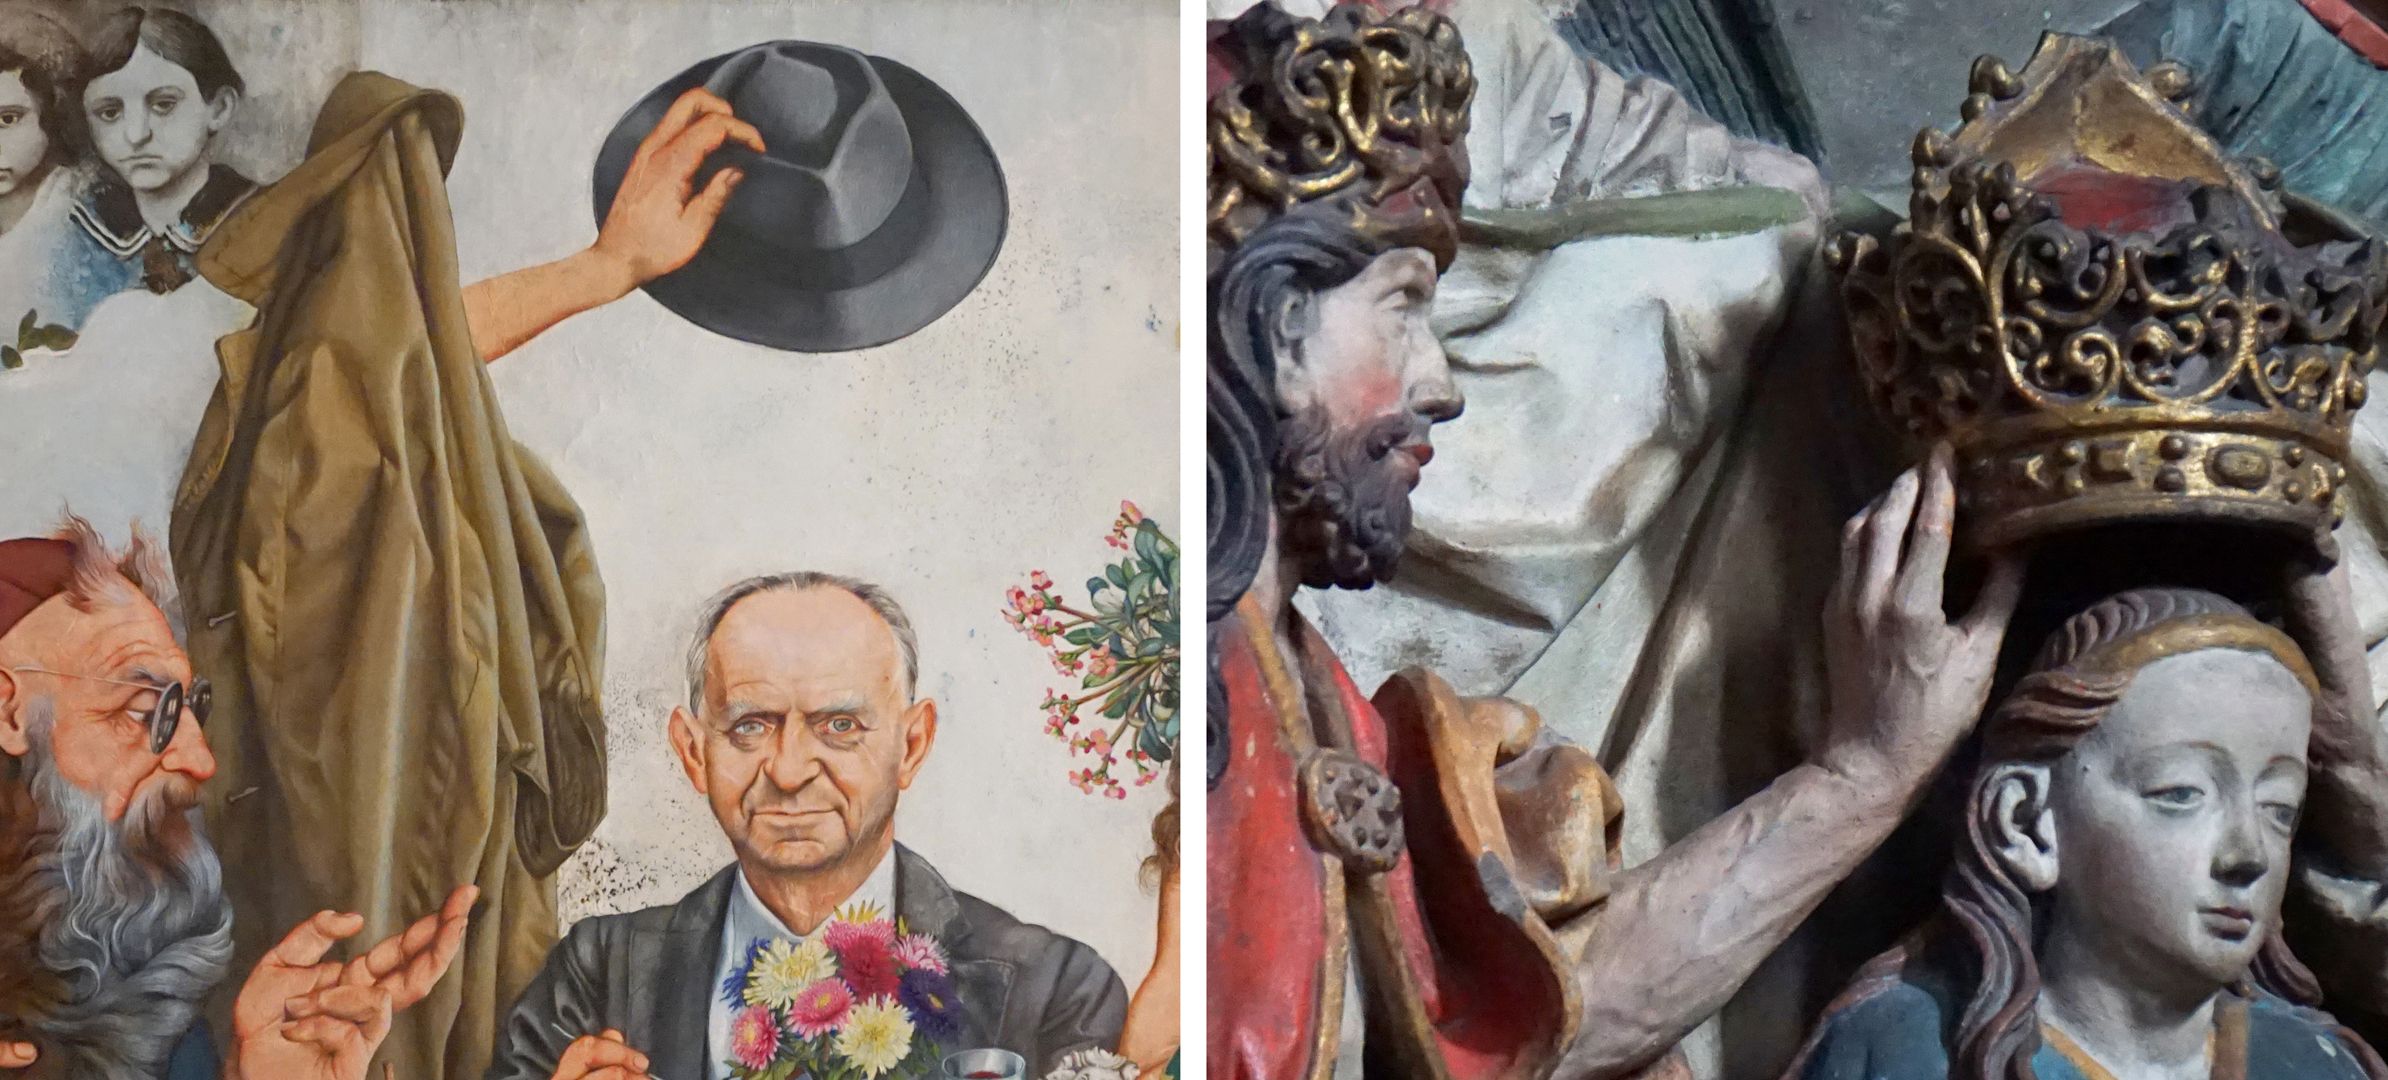 Hermann Kesten in the Café The hat over Kesten that protects the poet - or crowns him ? / Here, as a comparison, the crowning of the Virgin by Kraft from the epitaph of Hans Rebeck in the Frauenkirchefétisch.